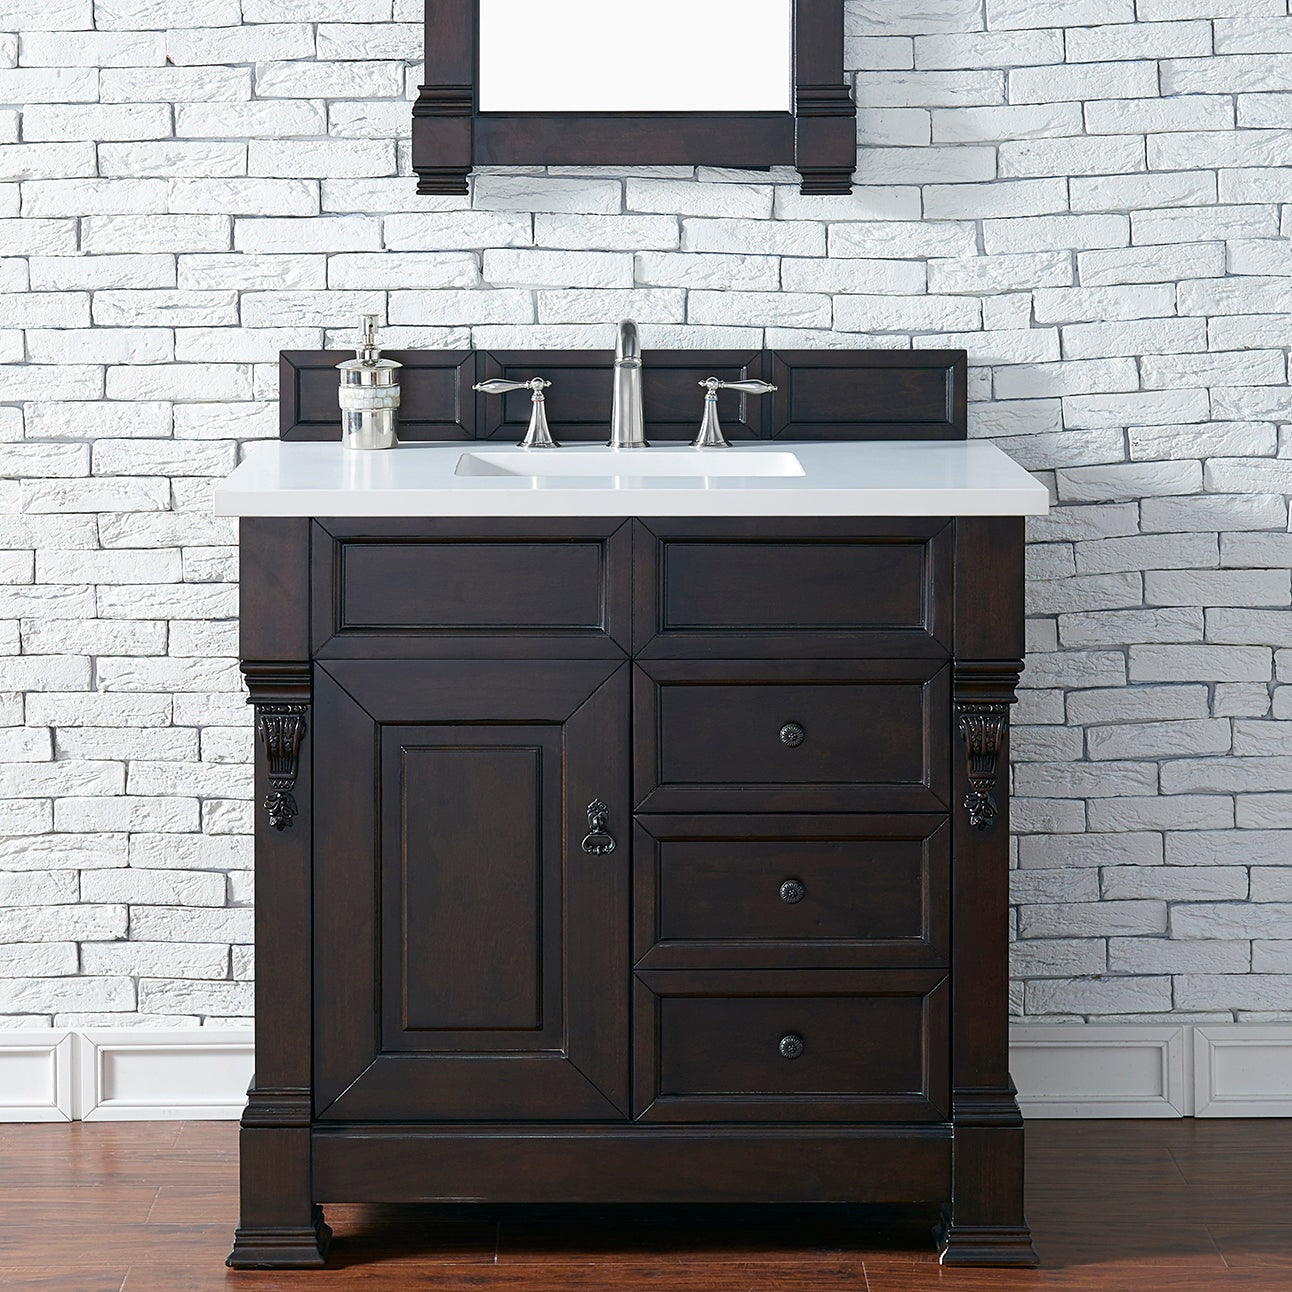 Brookfield 36" Single Bathroom Vanity in Burnished Mahogany Single Bathroom Vanity James Martin Vanities Select Your Top 